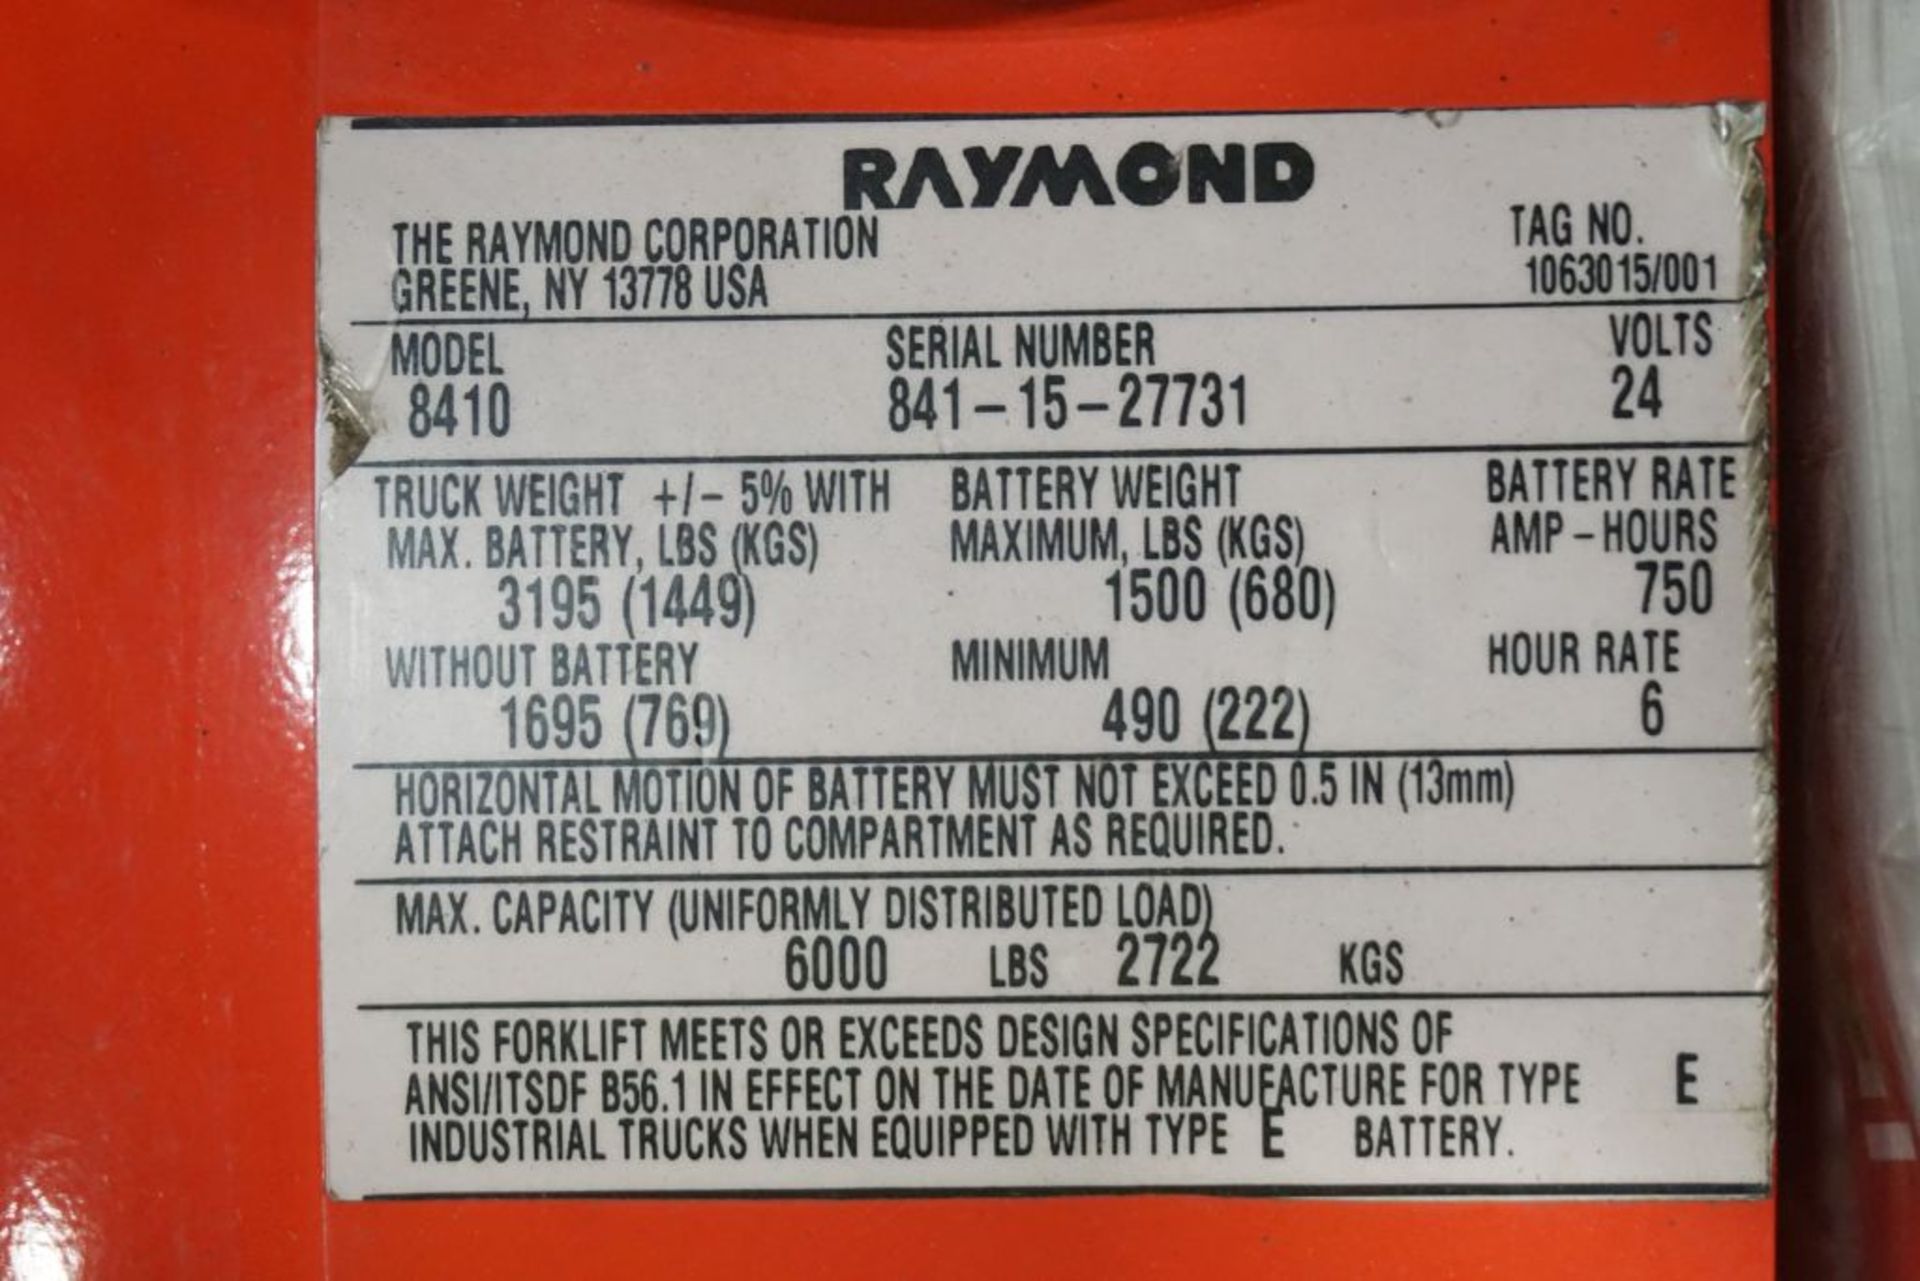 Raymond 8410 Walkie Rider Electric Pallet Truck - Model No. 8410; Serial No. 841-15-27731; 24V; 6, - Image 11 of 12